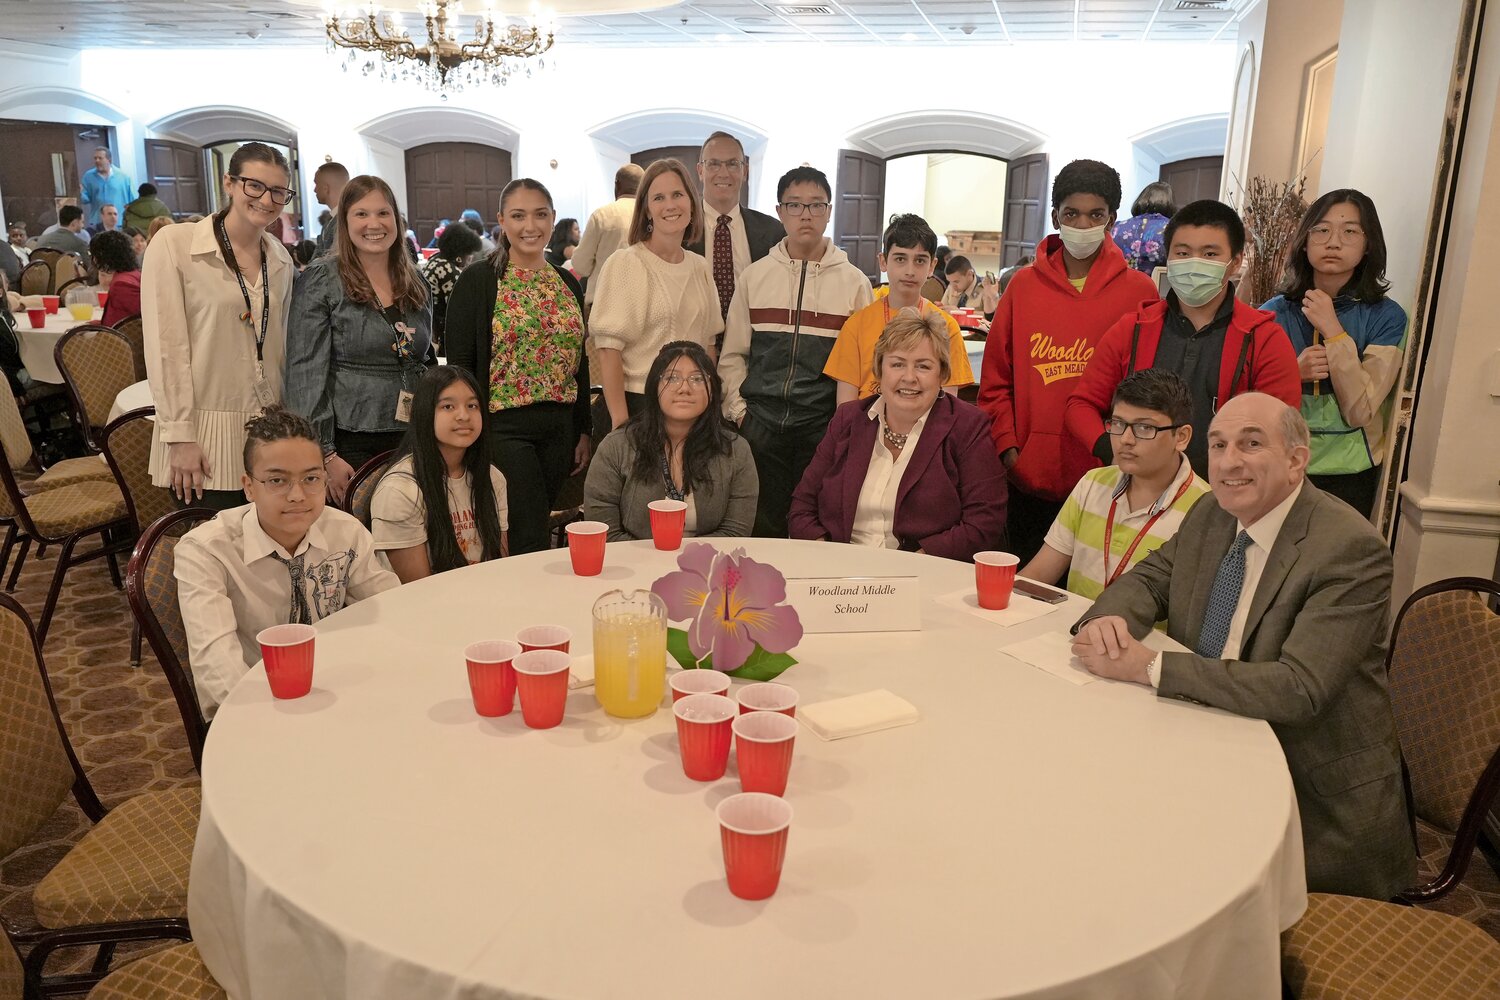 Each school had its own table, and kids and mentors alike from the Nassau County Bar Association Mentor Program got to enjoy a menu with favorites such as macaroni and cheese, pizza, french fries and more.